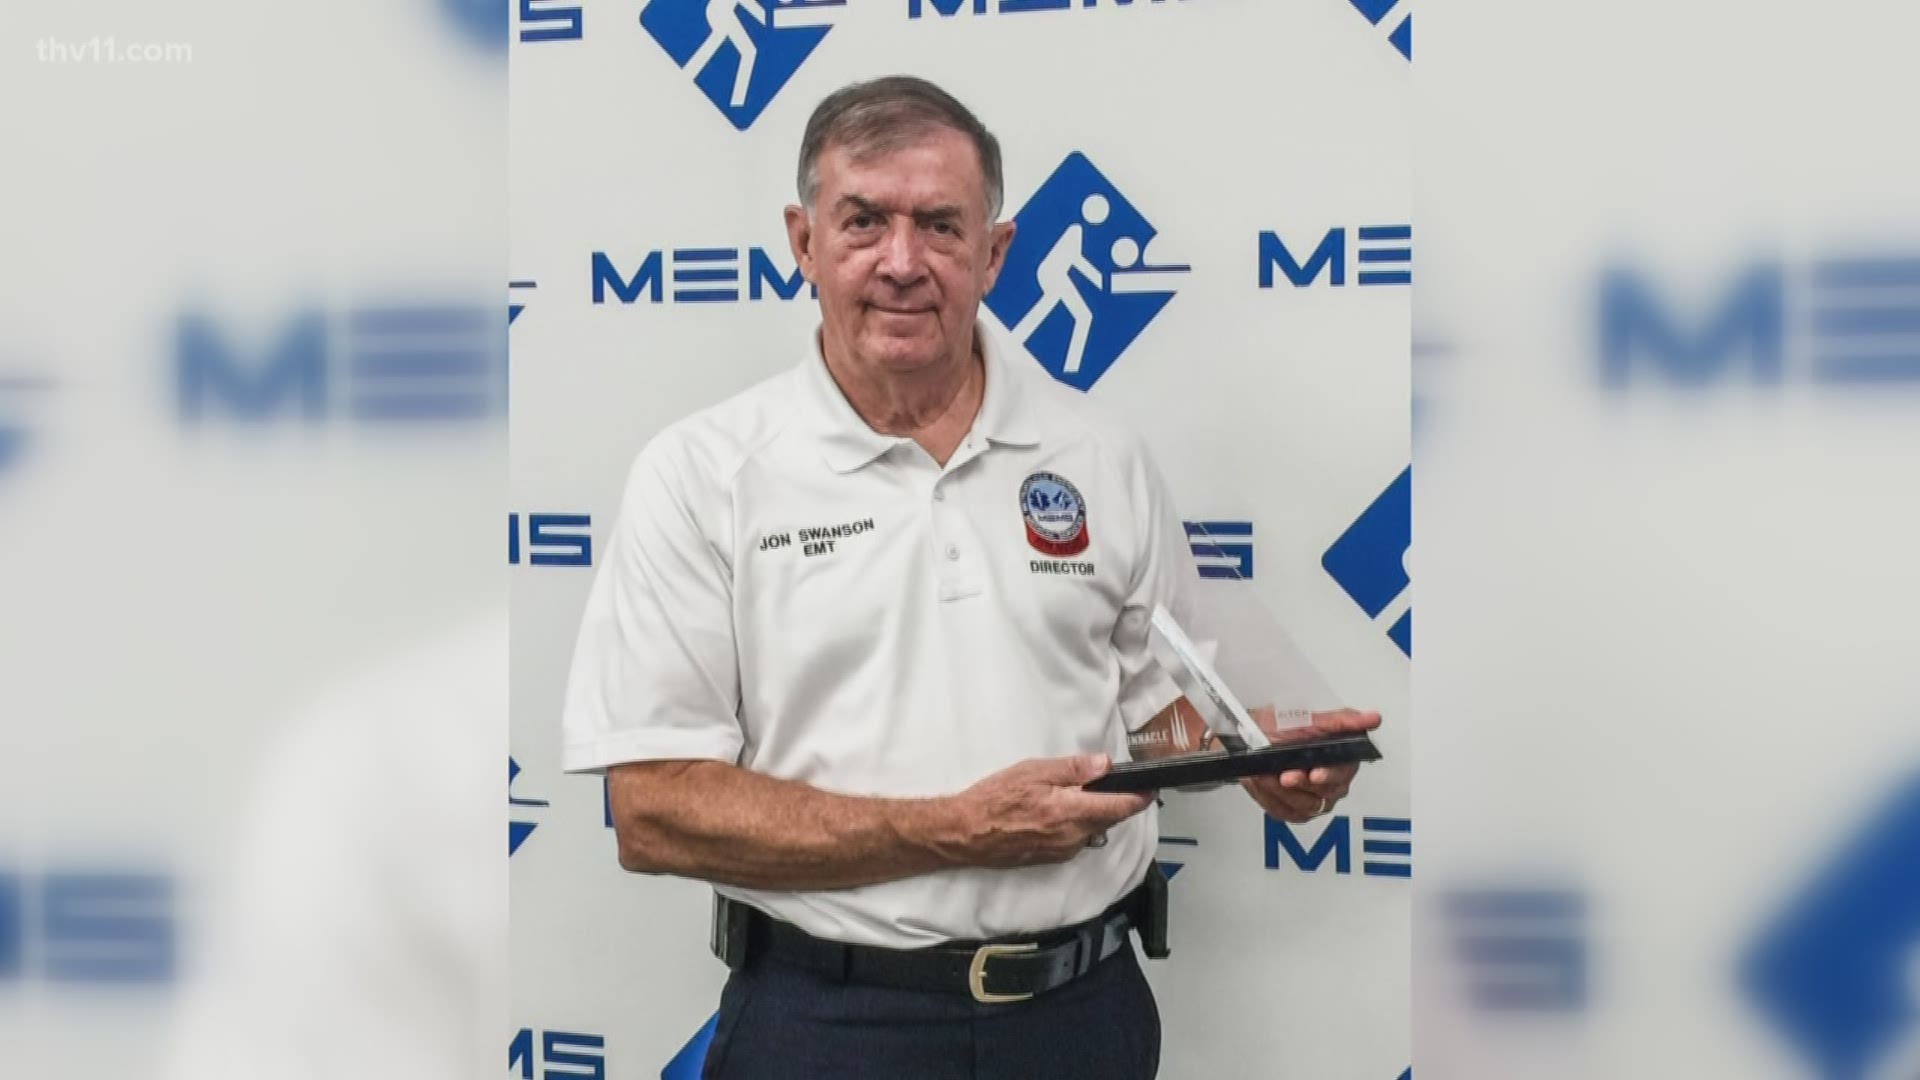 Jon Swanson, executive director of MEMS, took home the 2018 Excellence in Leadership Award at a national conference. Then, on Aug. 4, MEMS received the Advanced Life Support Service of the Year Award from the Arkansas Ambulance Association.